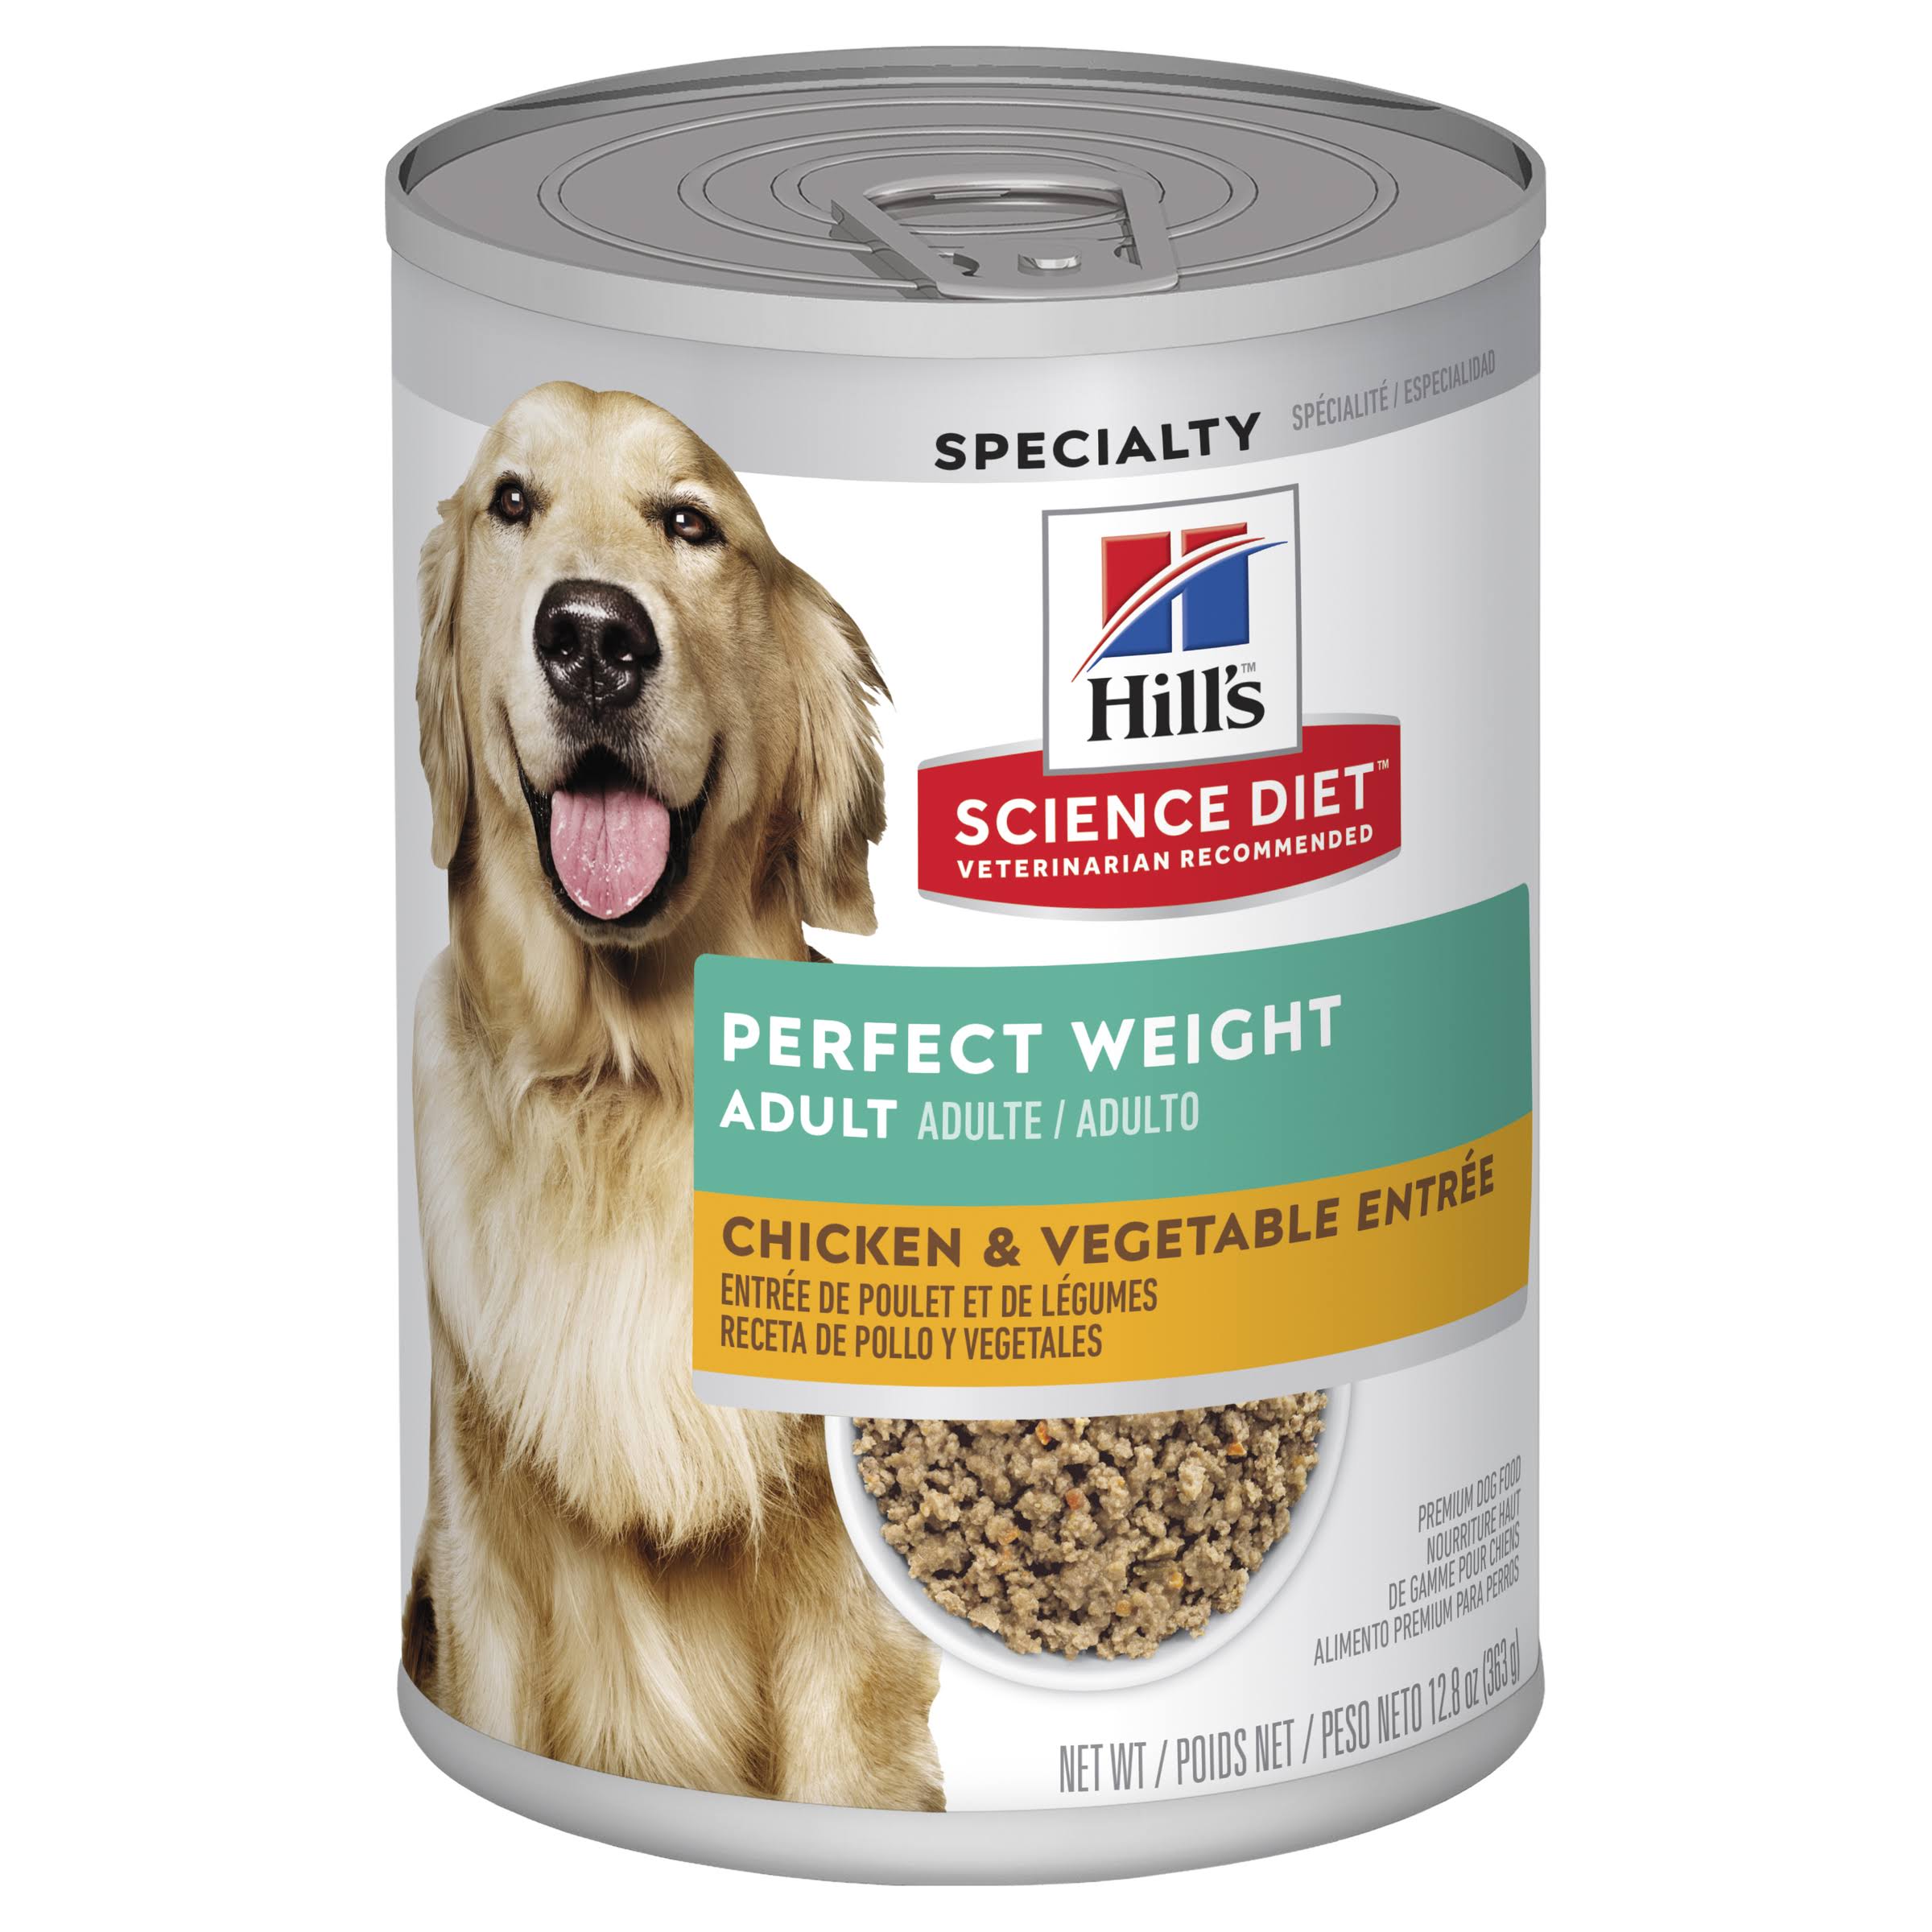 Hill's Science Diet Perfect Weight Dog Food - Adult, Chicken & Vegetable Stew, 12.8oz